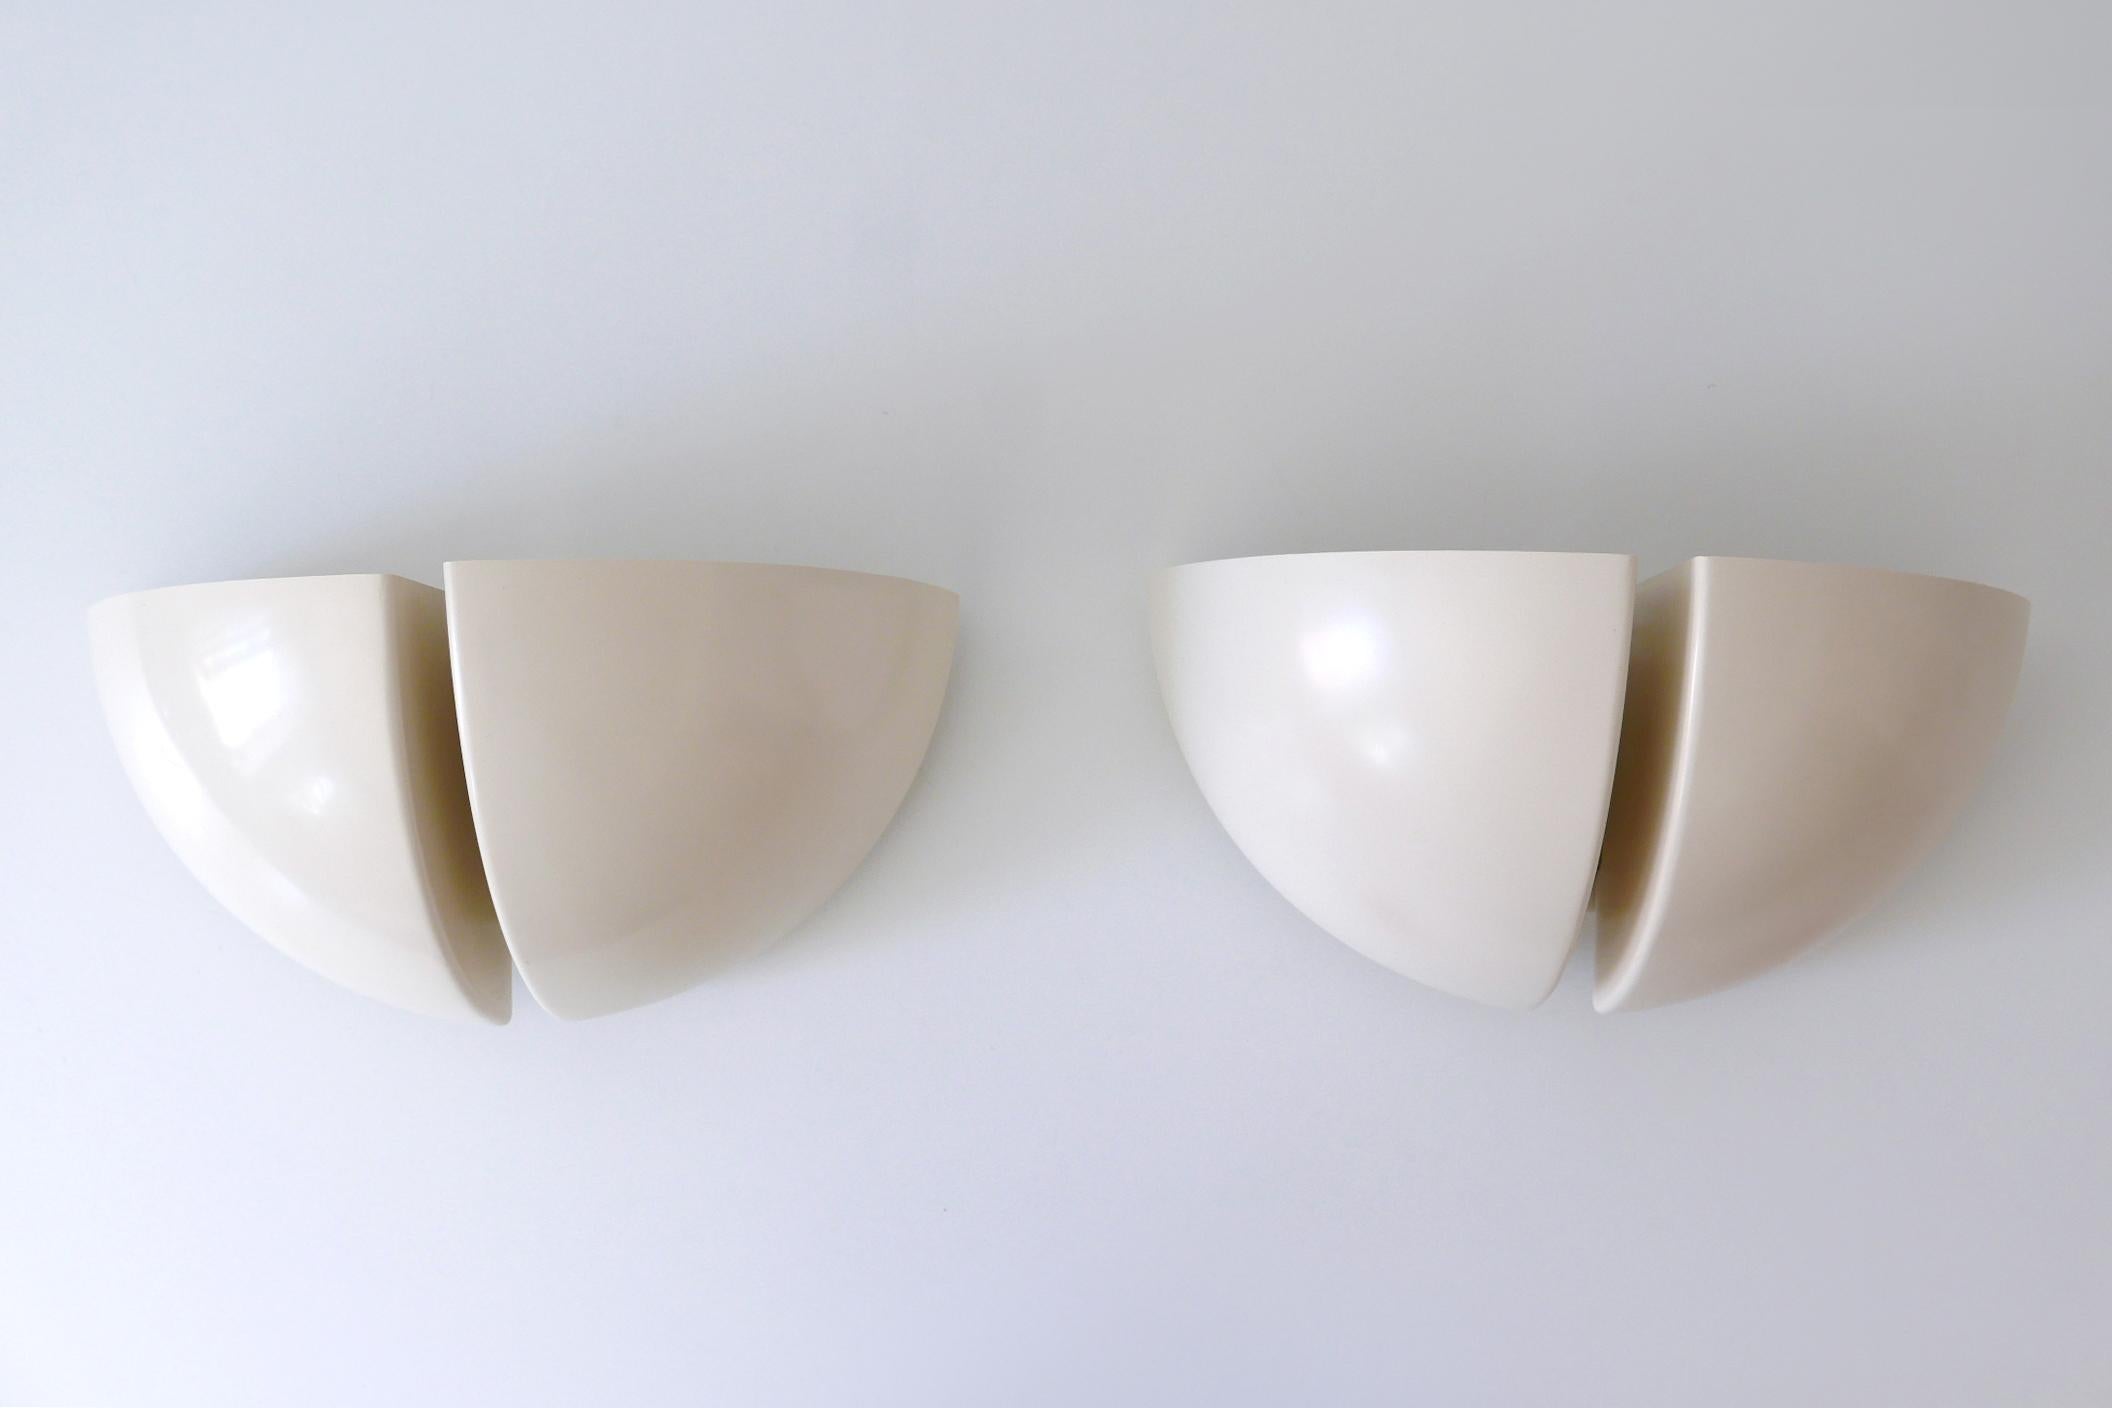 Enameled Set of Two RAAK Octavo Wall Lamps or Sconces by RAAK, Netherlands, 1970s For Sale